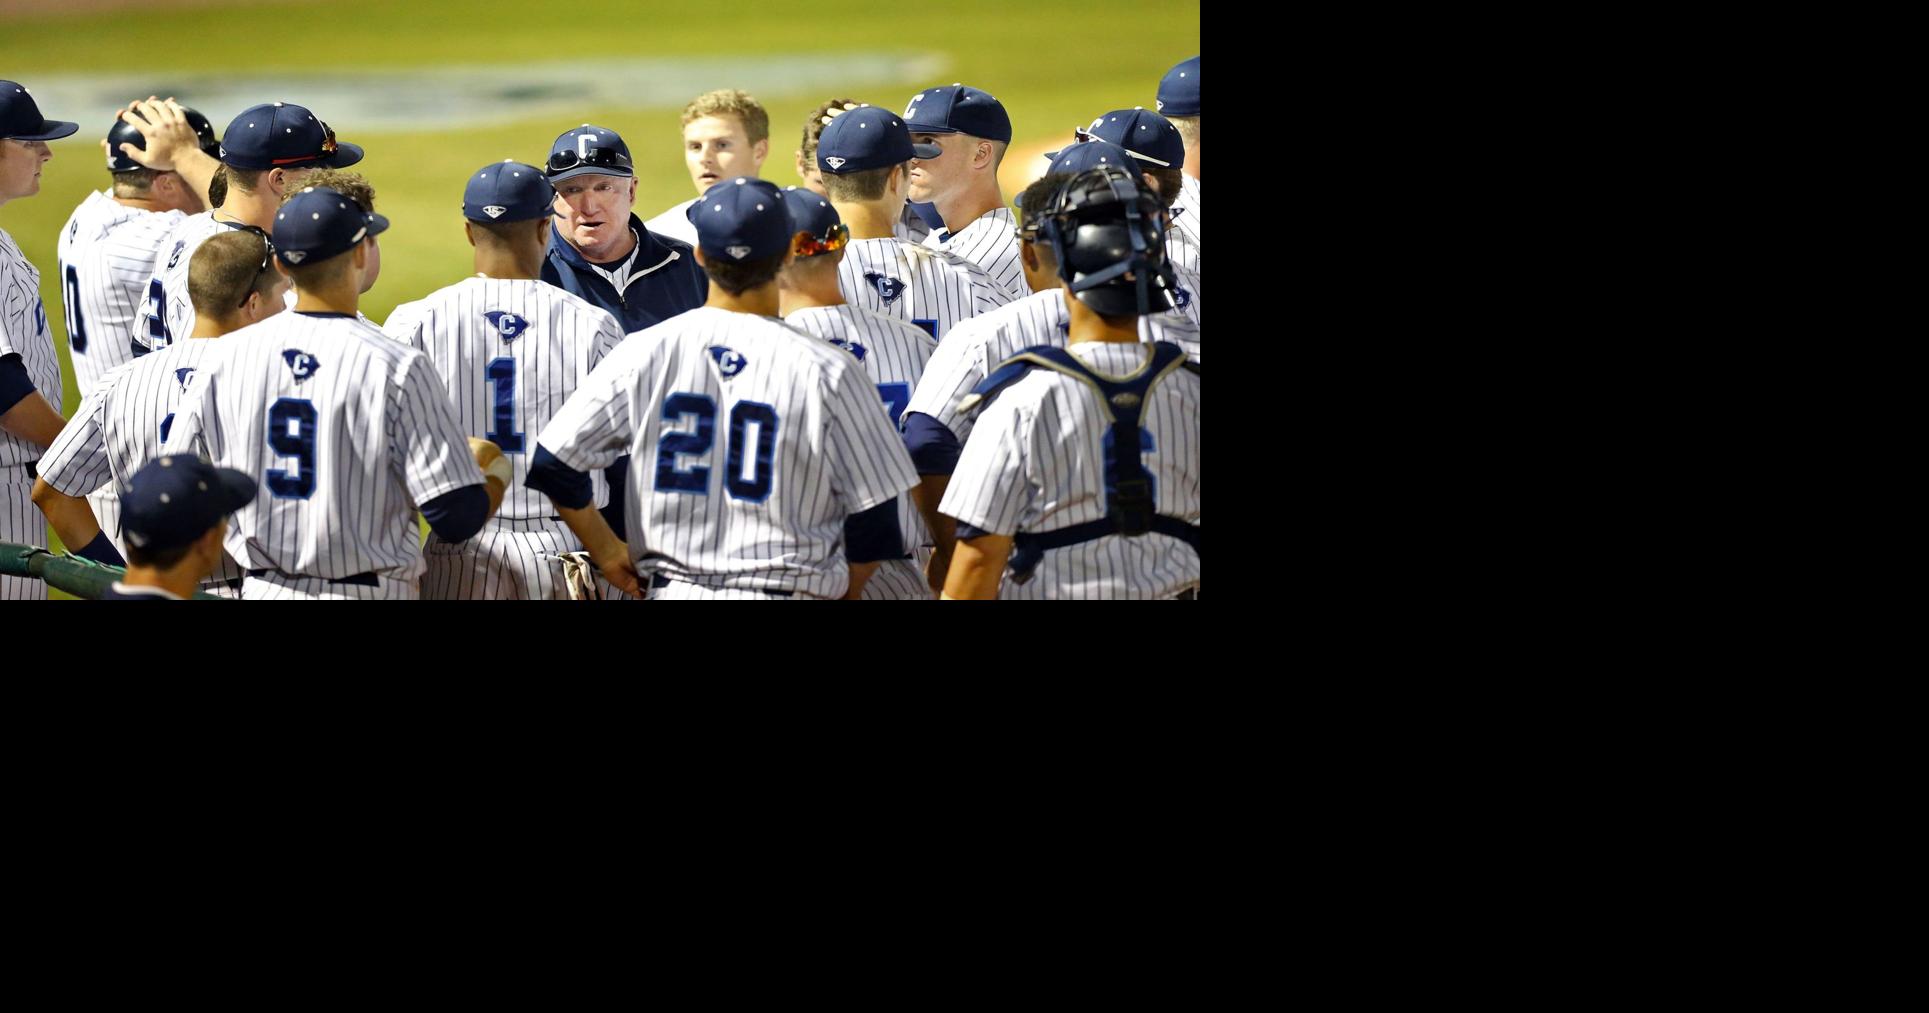 Citadel baseball schedule features recent national champs Sports